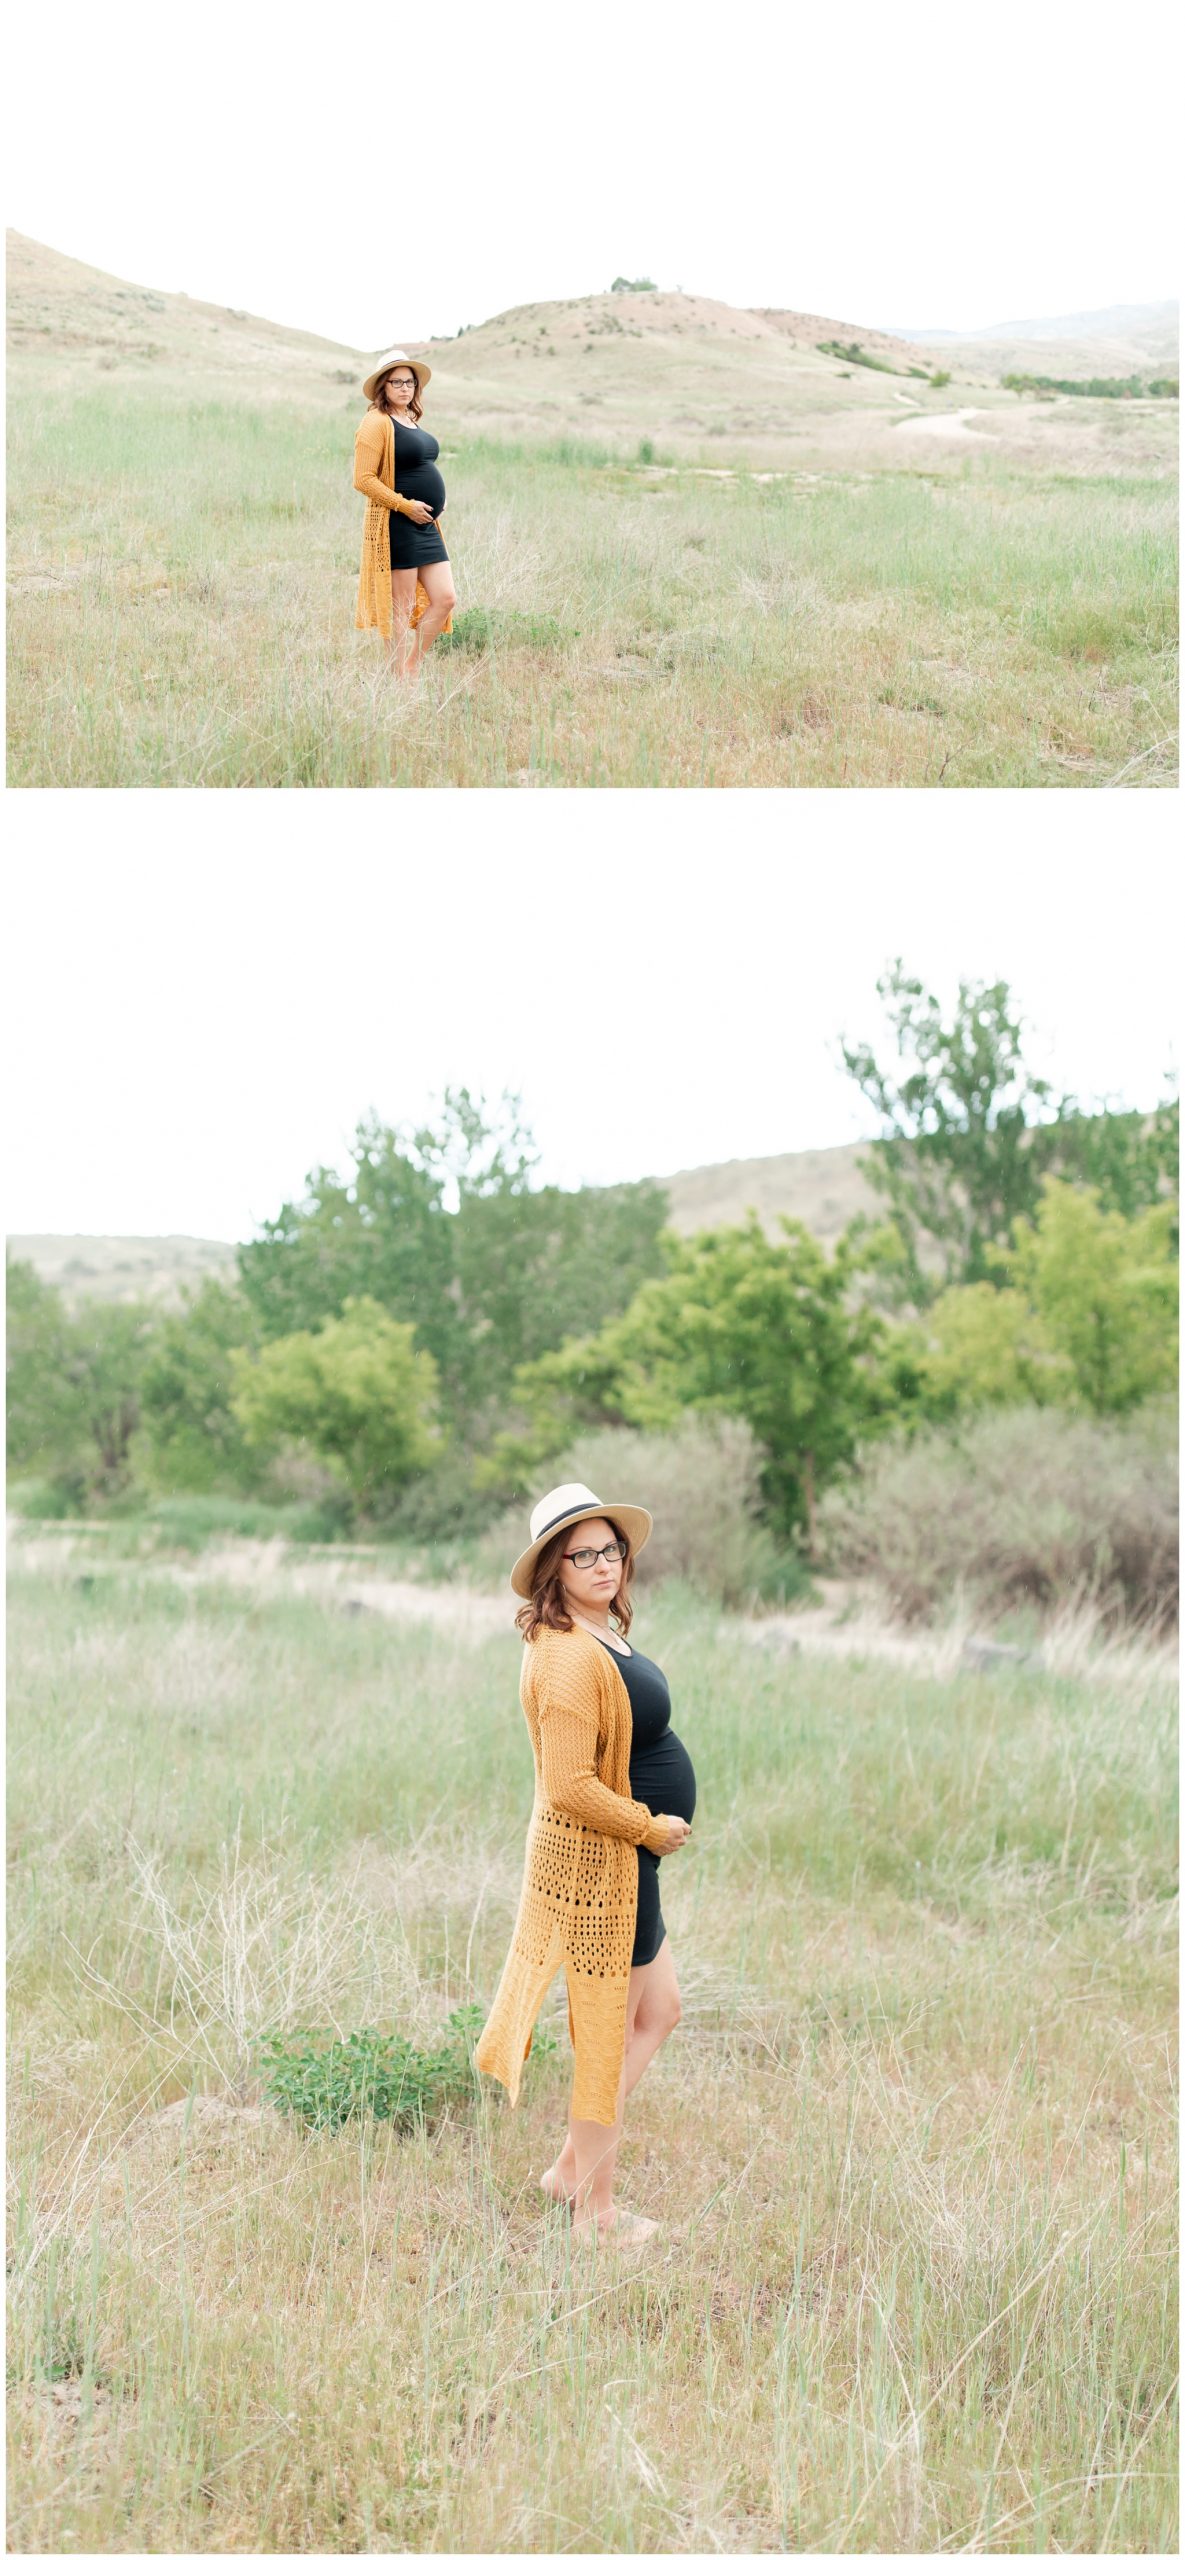 Boho maternity pictures in Boise, Idaho near the military reserve. 